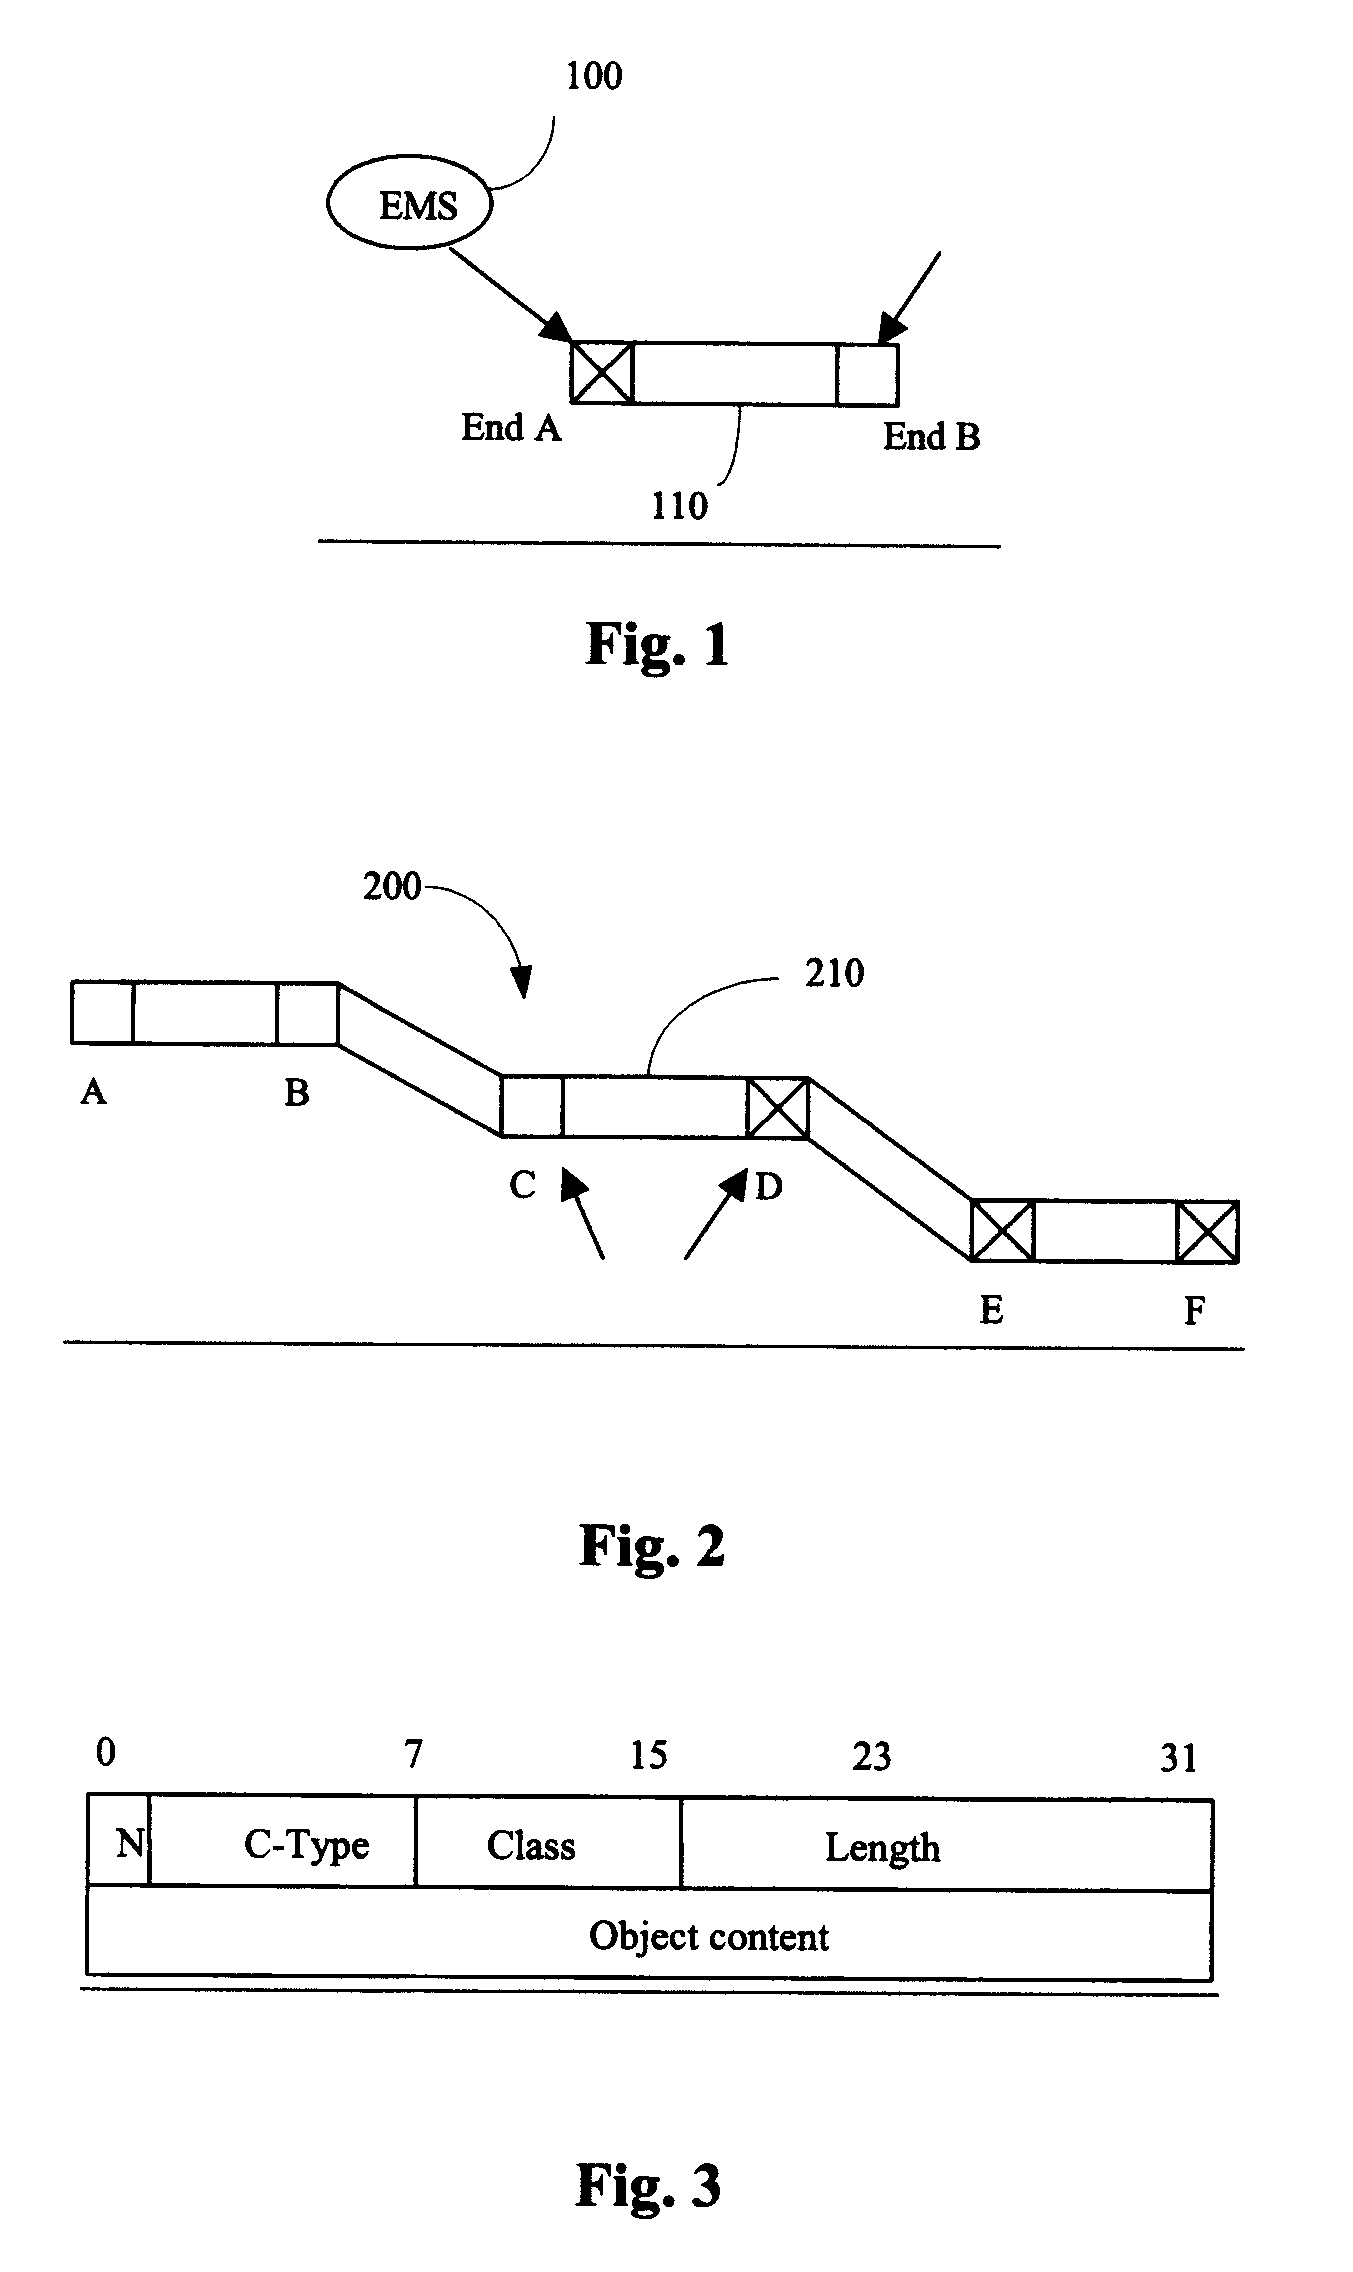 Method and an Apparatus for Consistency Verification of Traffic Engineering Link Timeslot Status